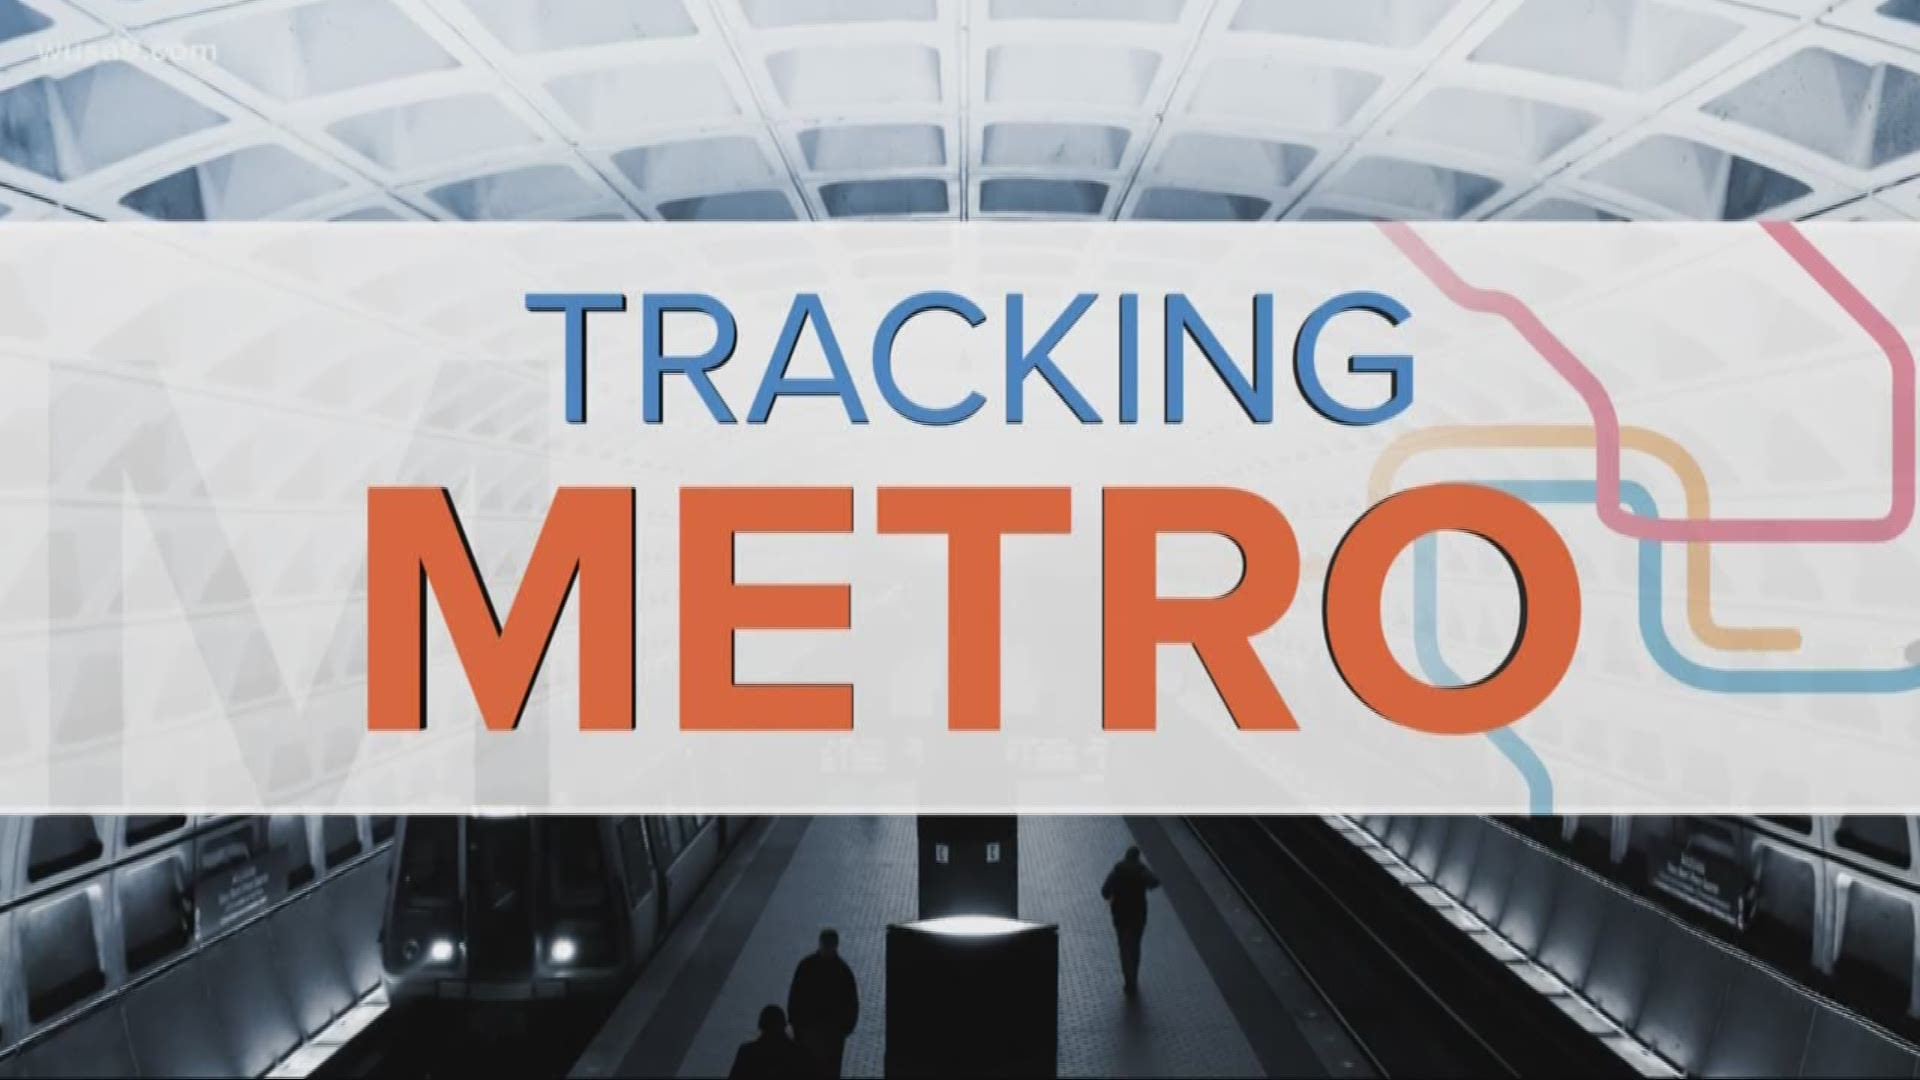 Metro spokesman Dan Stessel emphasized that free shuttle service is “not necessary” during this shutdown, adding that “taking a bus would take longer than simply taking the Blue Line train.”